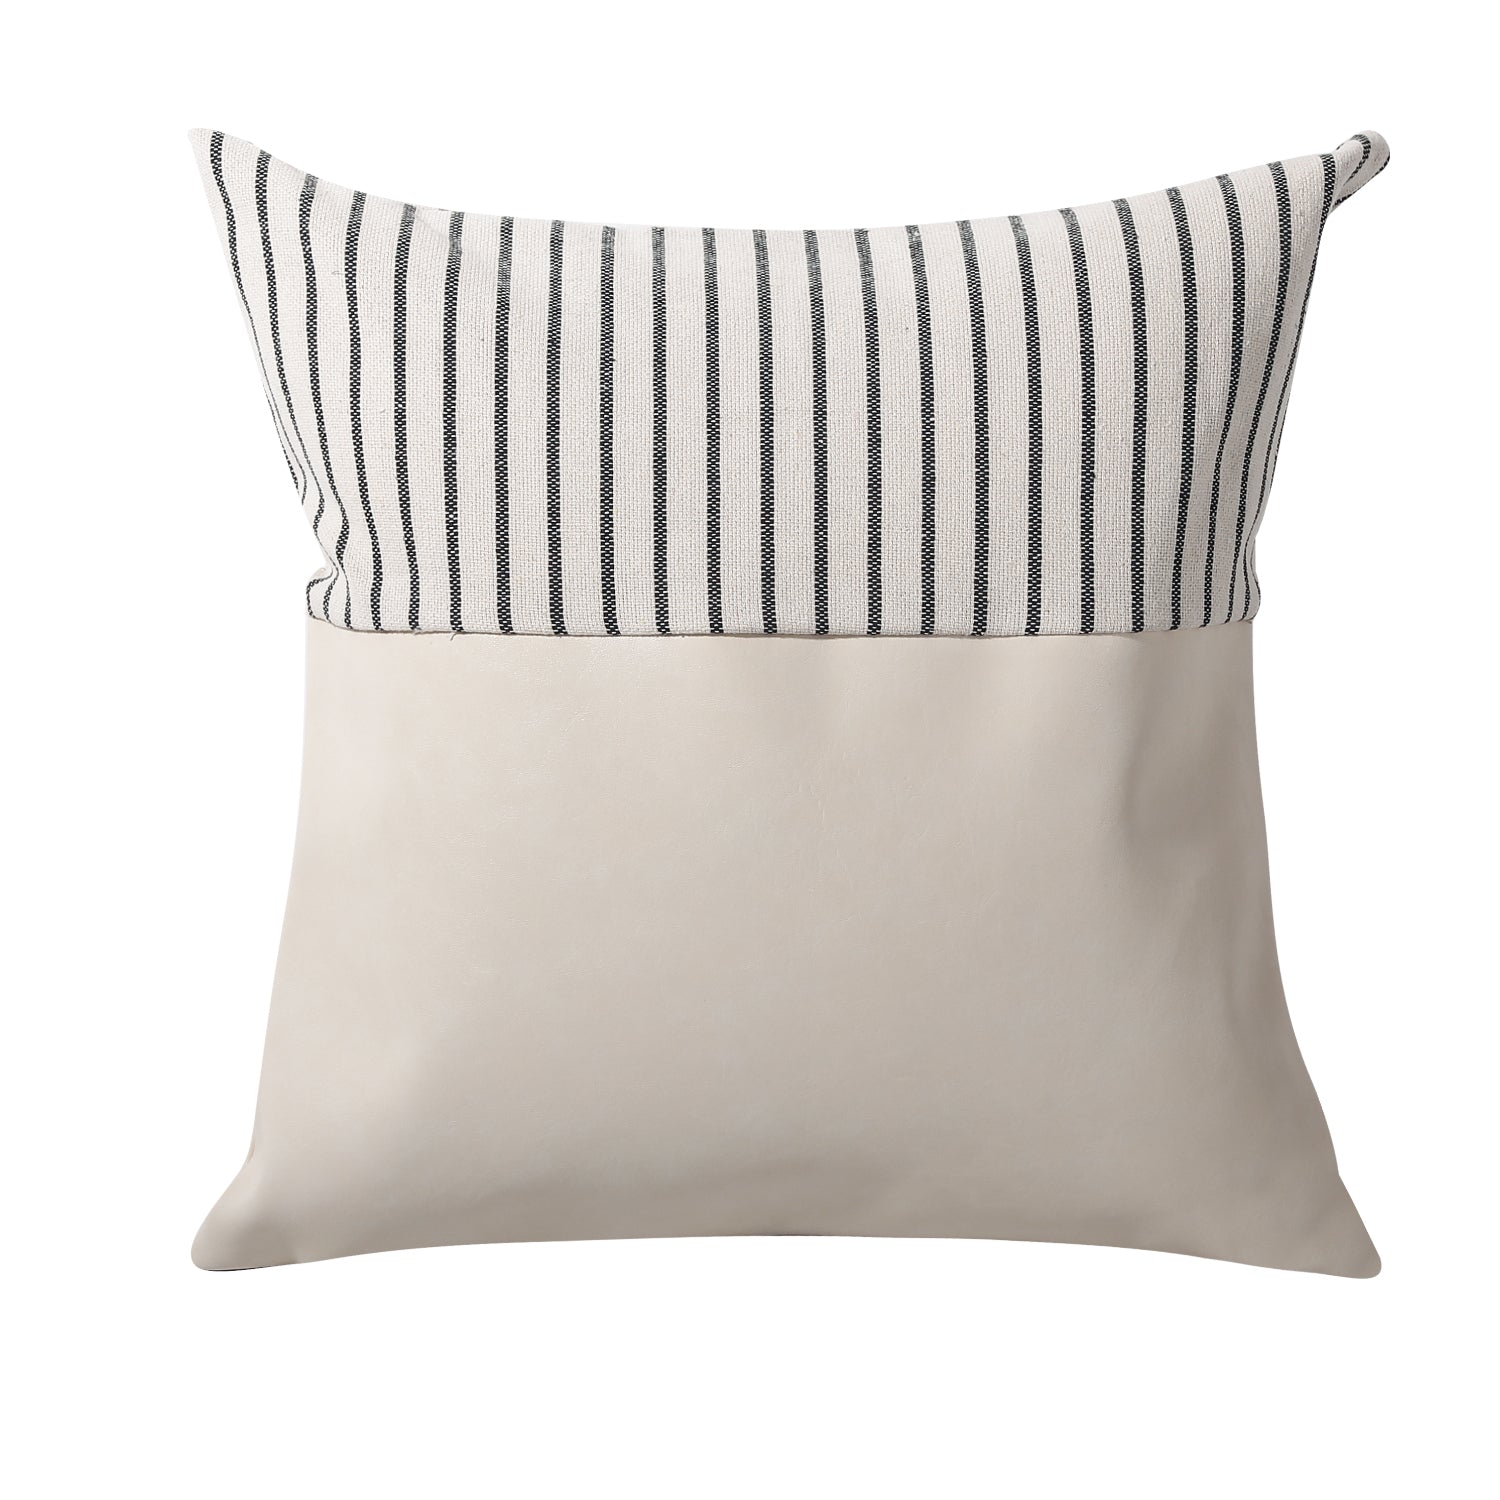 Faux Leather and Cotton Linen Decorative Throw Pillow Covers with Stripes